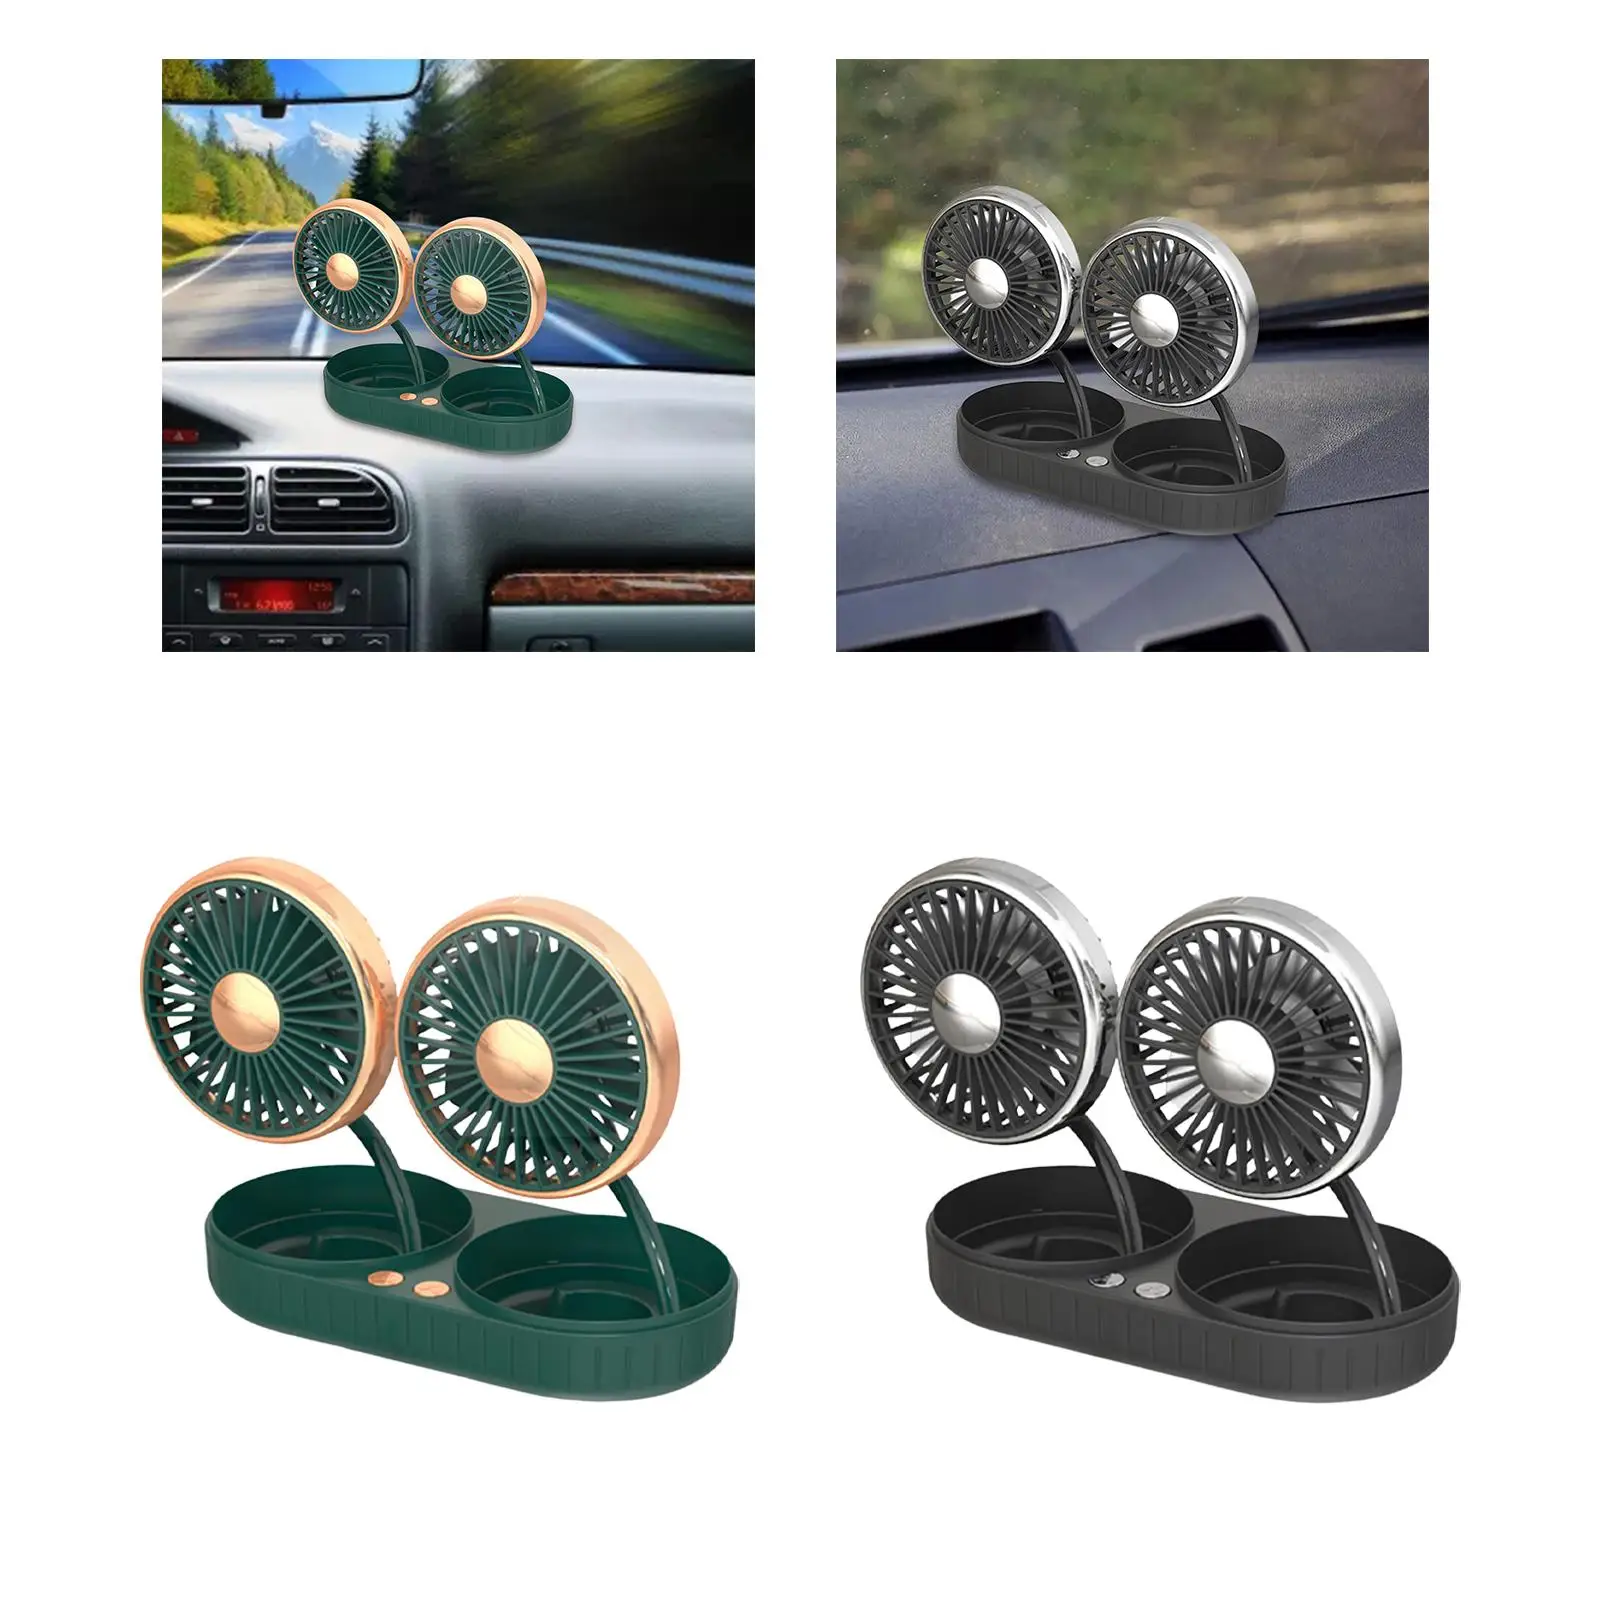 Vehicle Fan Double Head Auto Cooling Fan Accessories Durable Lightweight Strong Wind AntiSlip Car Cooling Fan for Dashboard